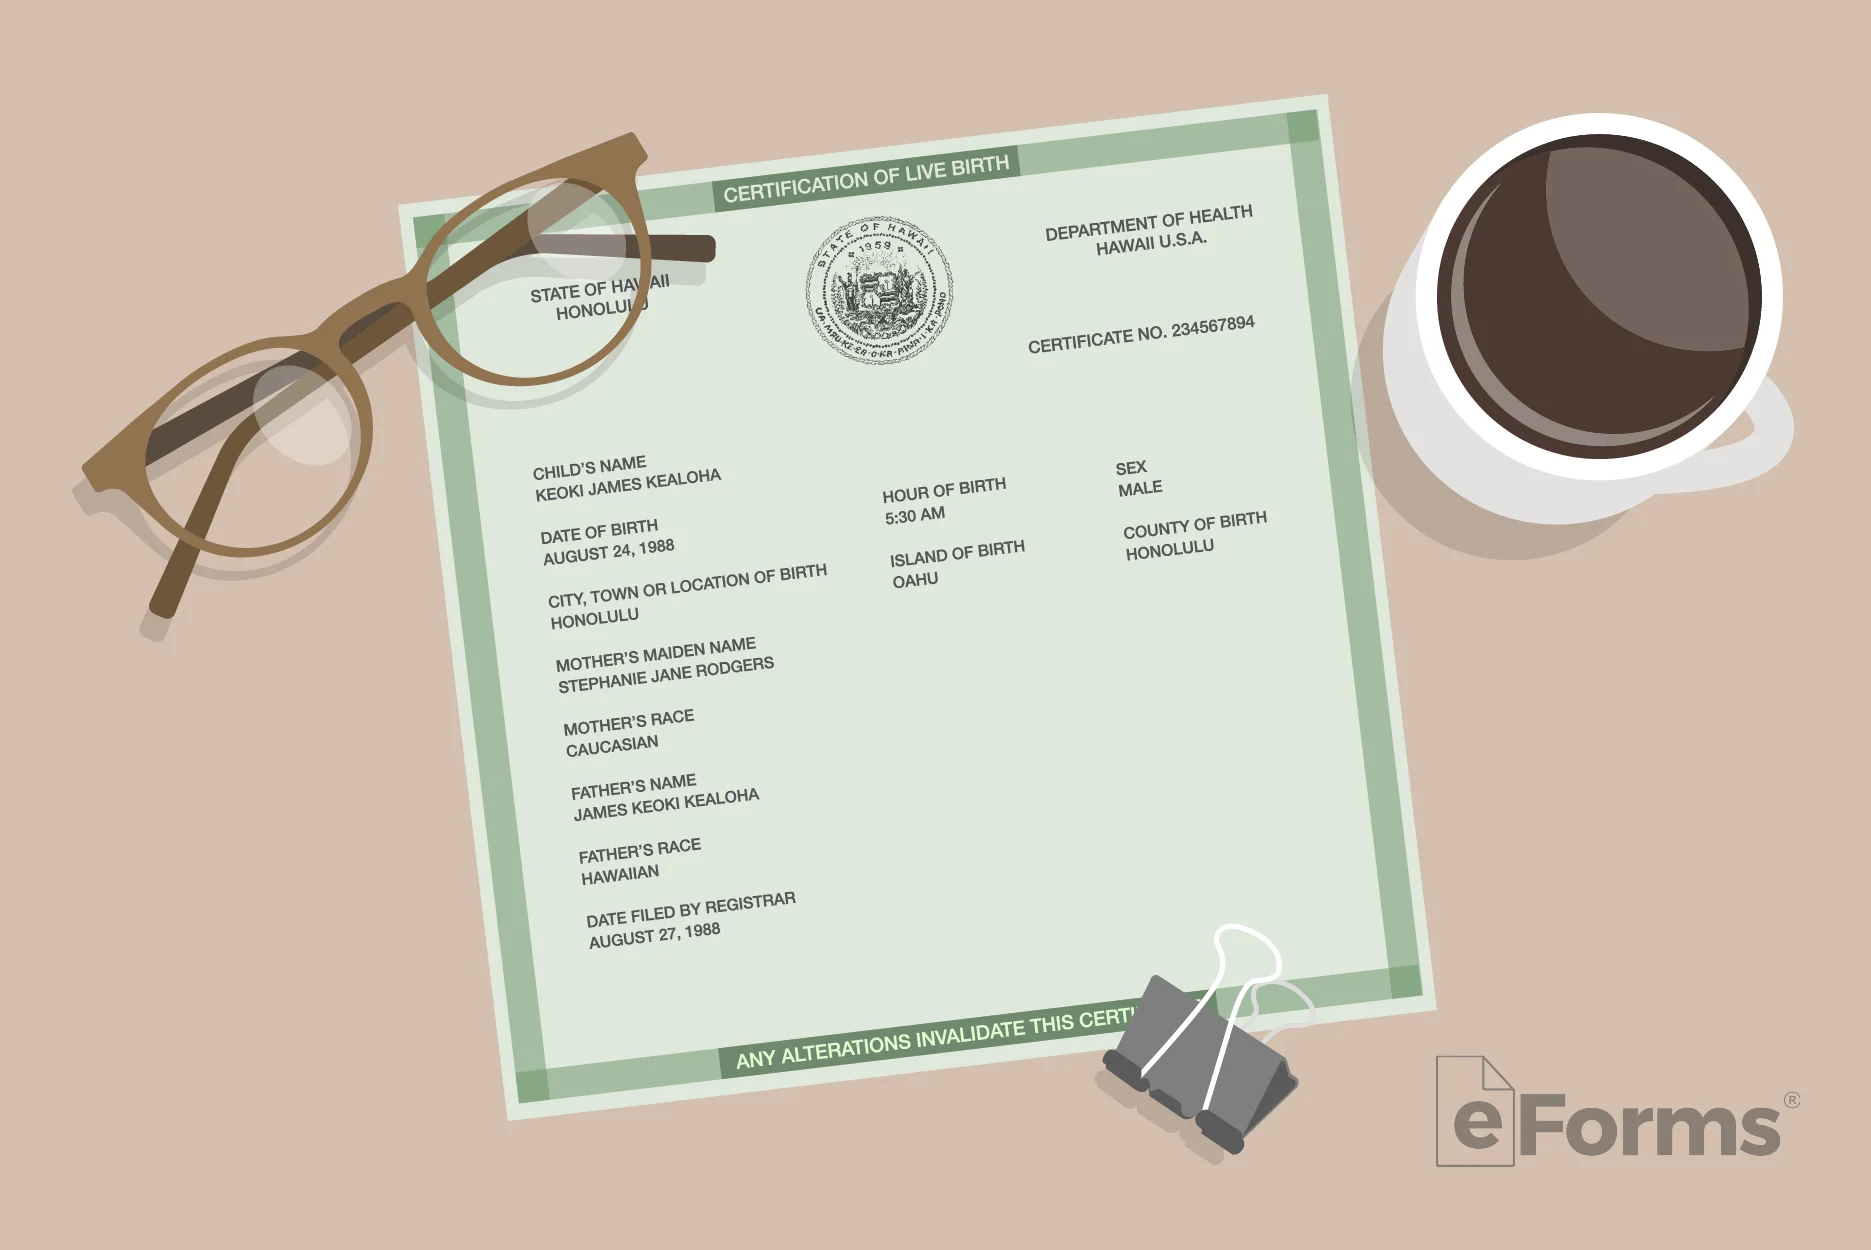 Hawaii birth certificate with a pair of eyeglasses, binder clip and cup of coffee.